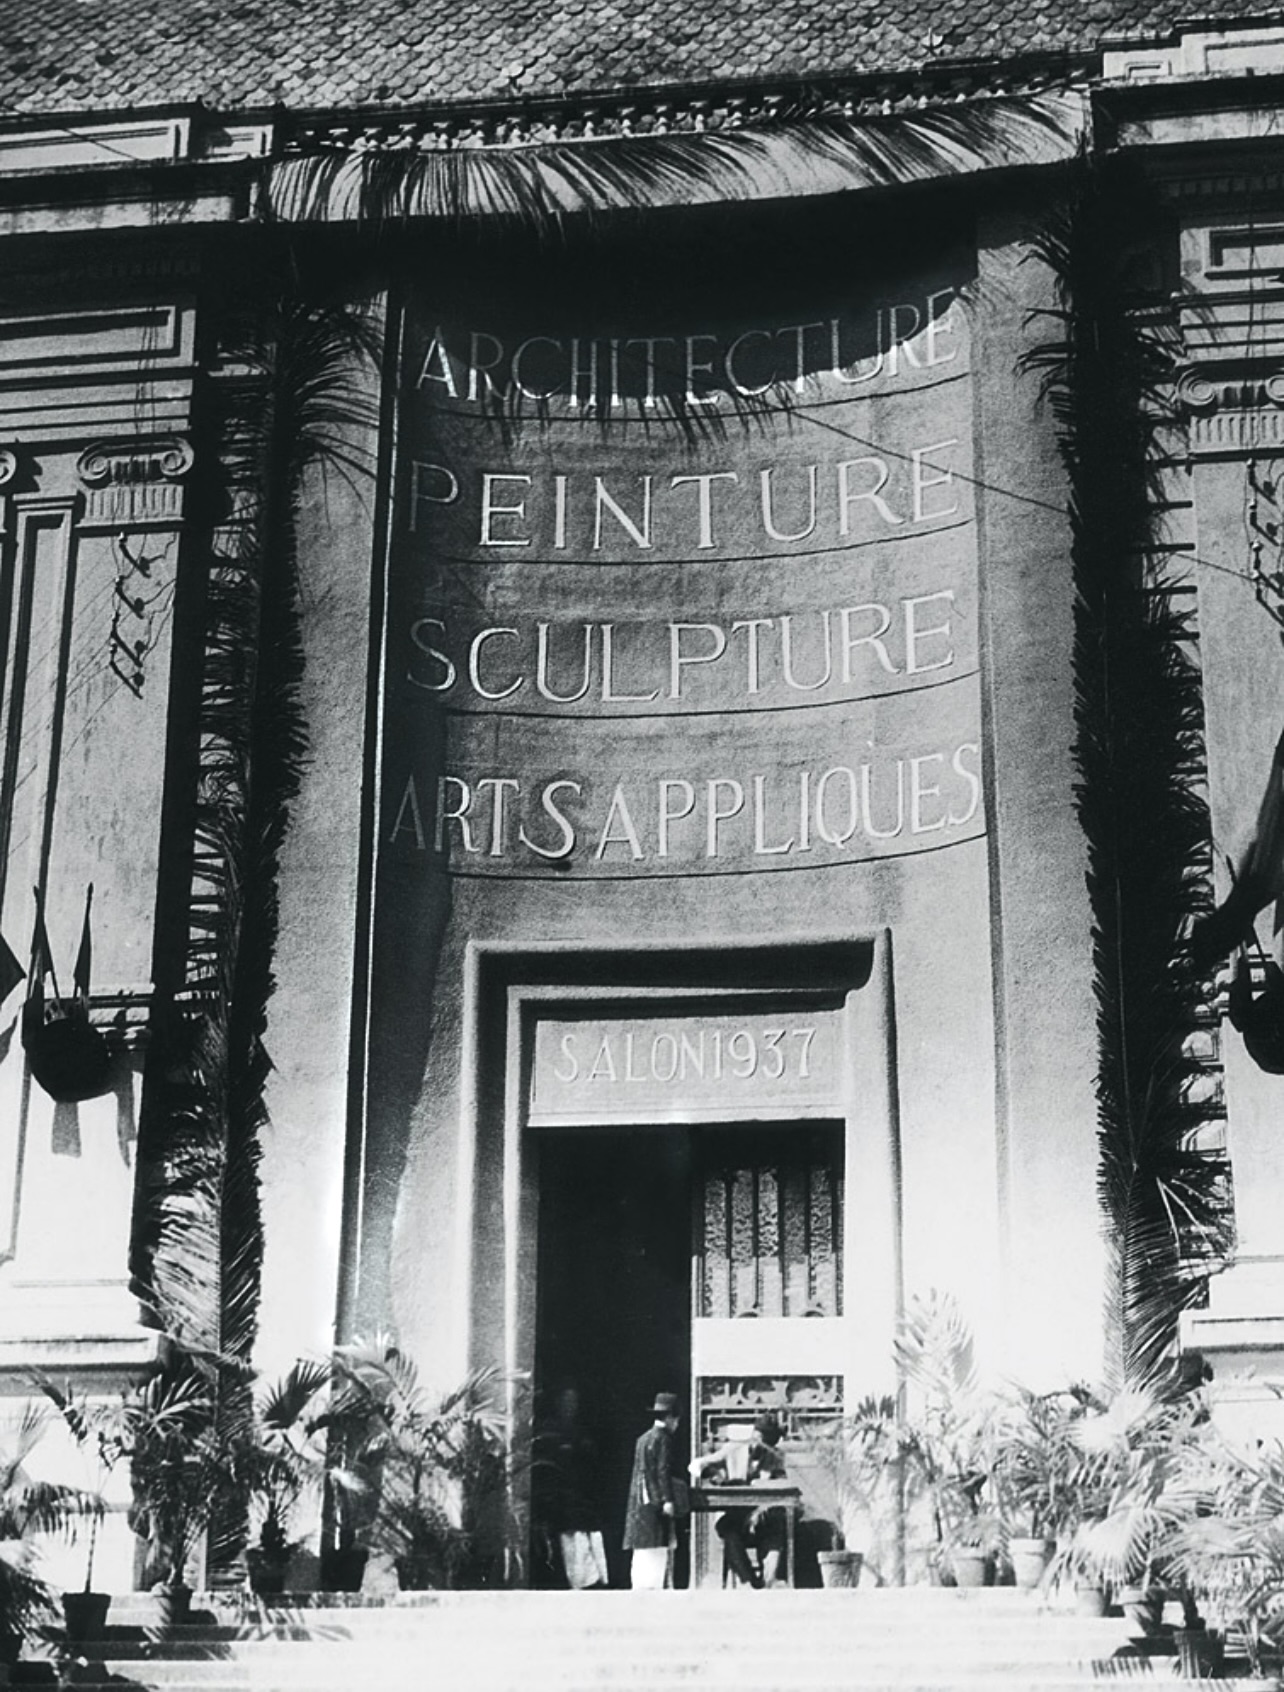 Entrance to the 1937 Salon, Annamite society of encouragement for the arts and industry, according to architect Hoang Nhu Tiep’s project